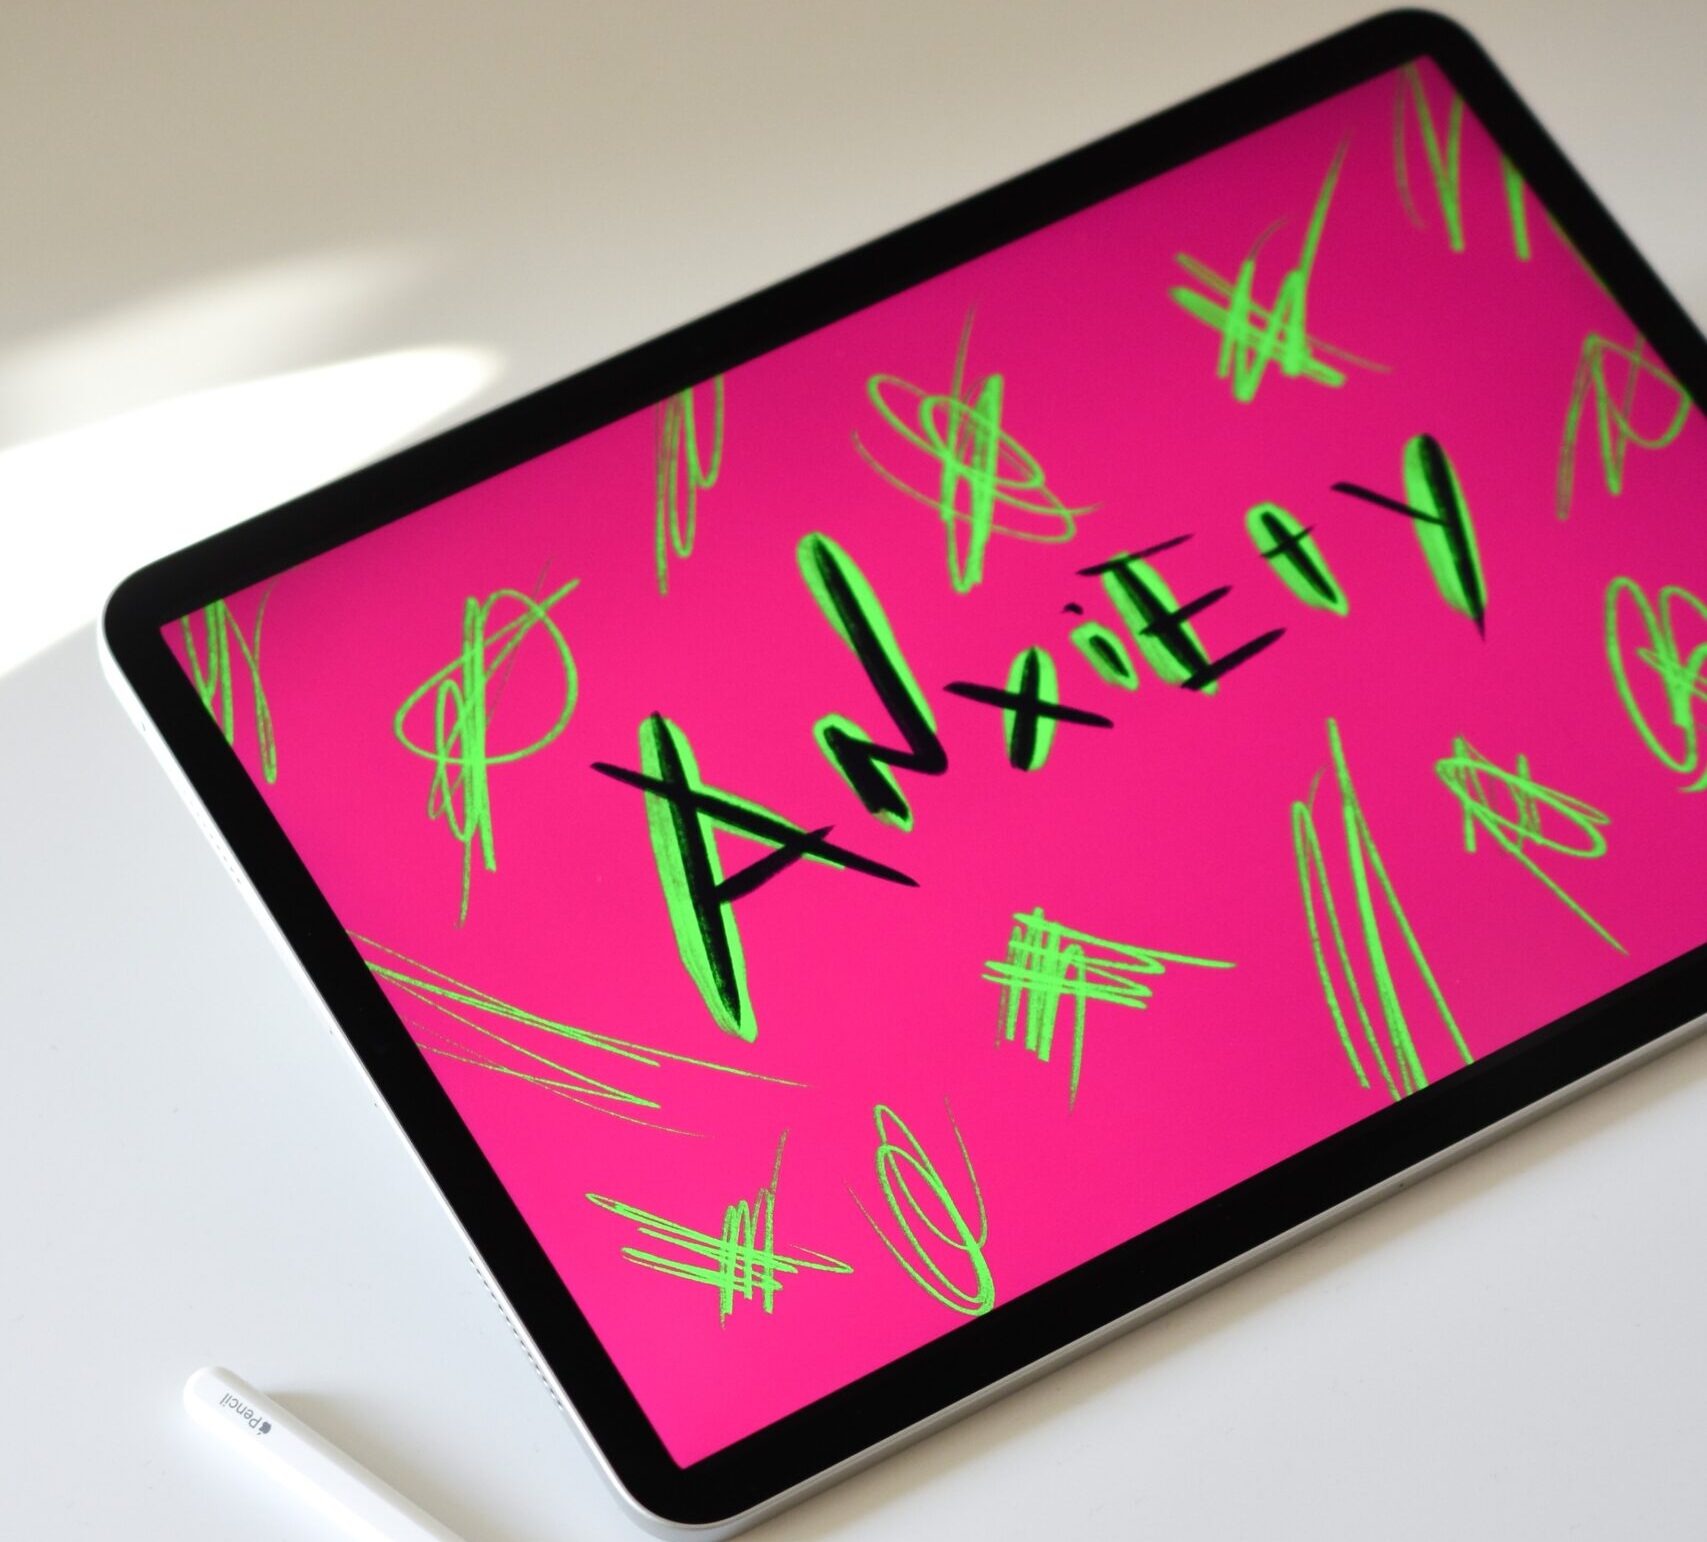 tablet with screen displaying word anxiety on bright pink background with green doodles